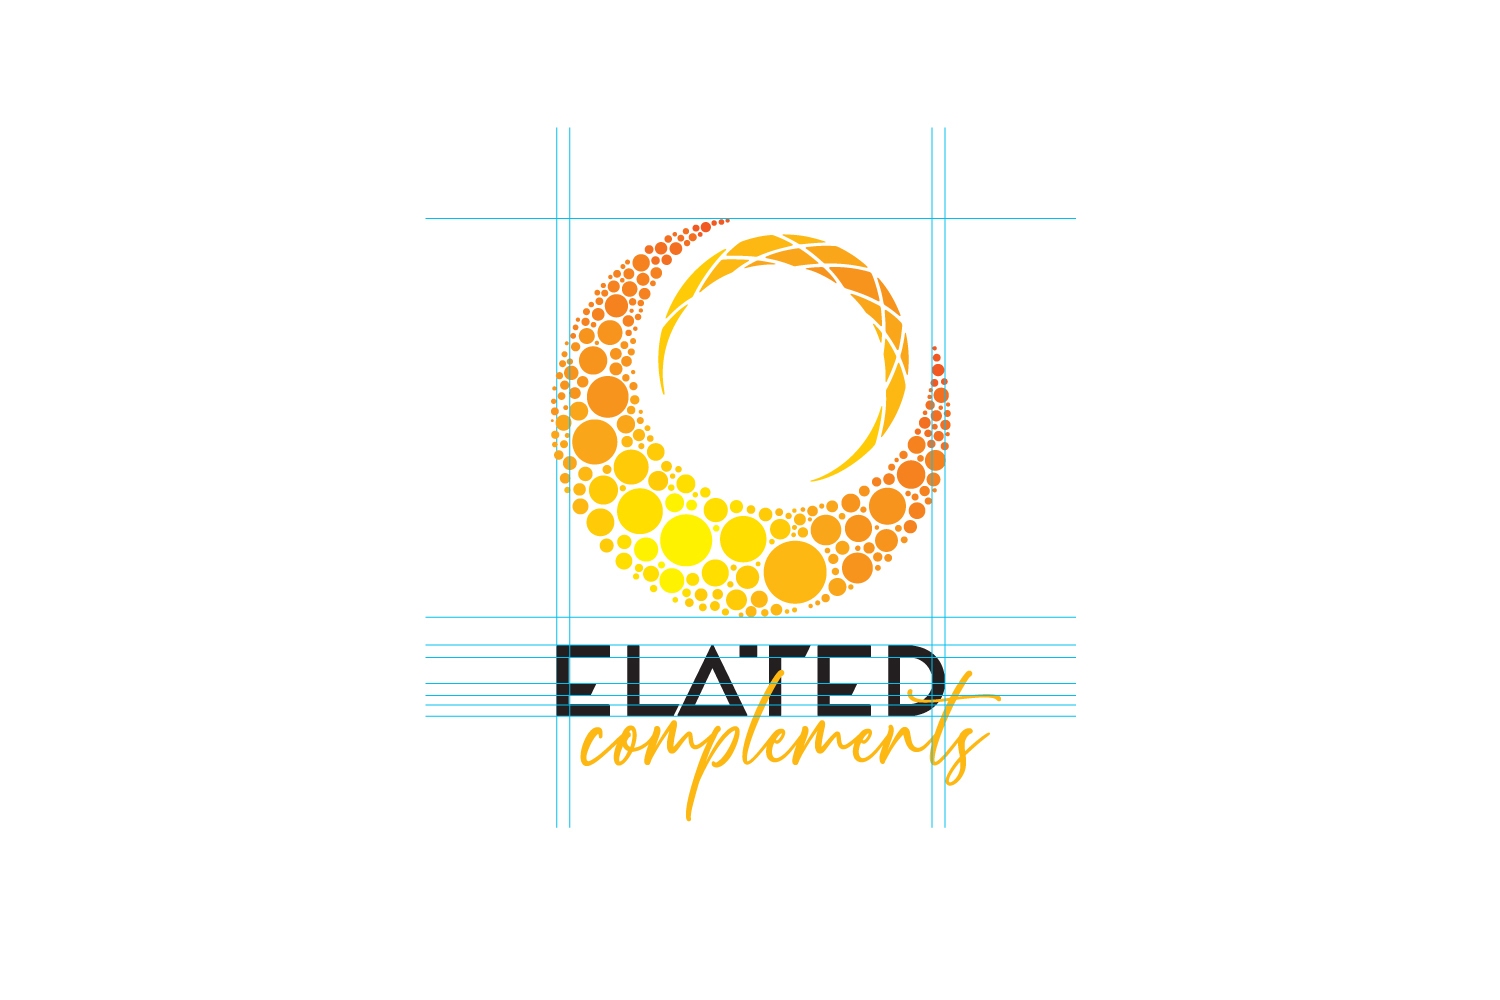 ELATED complements logo final elignment